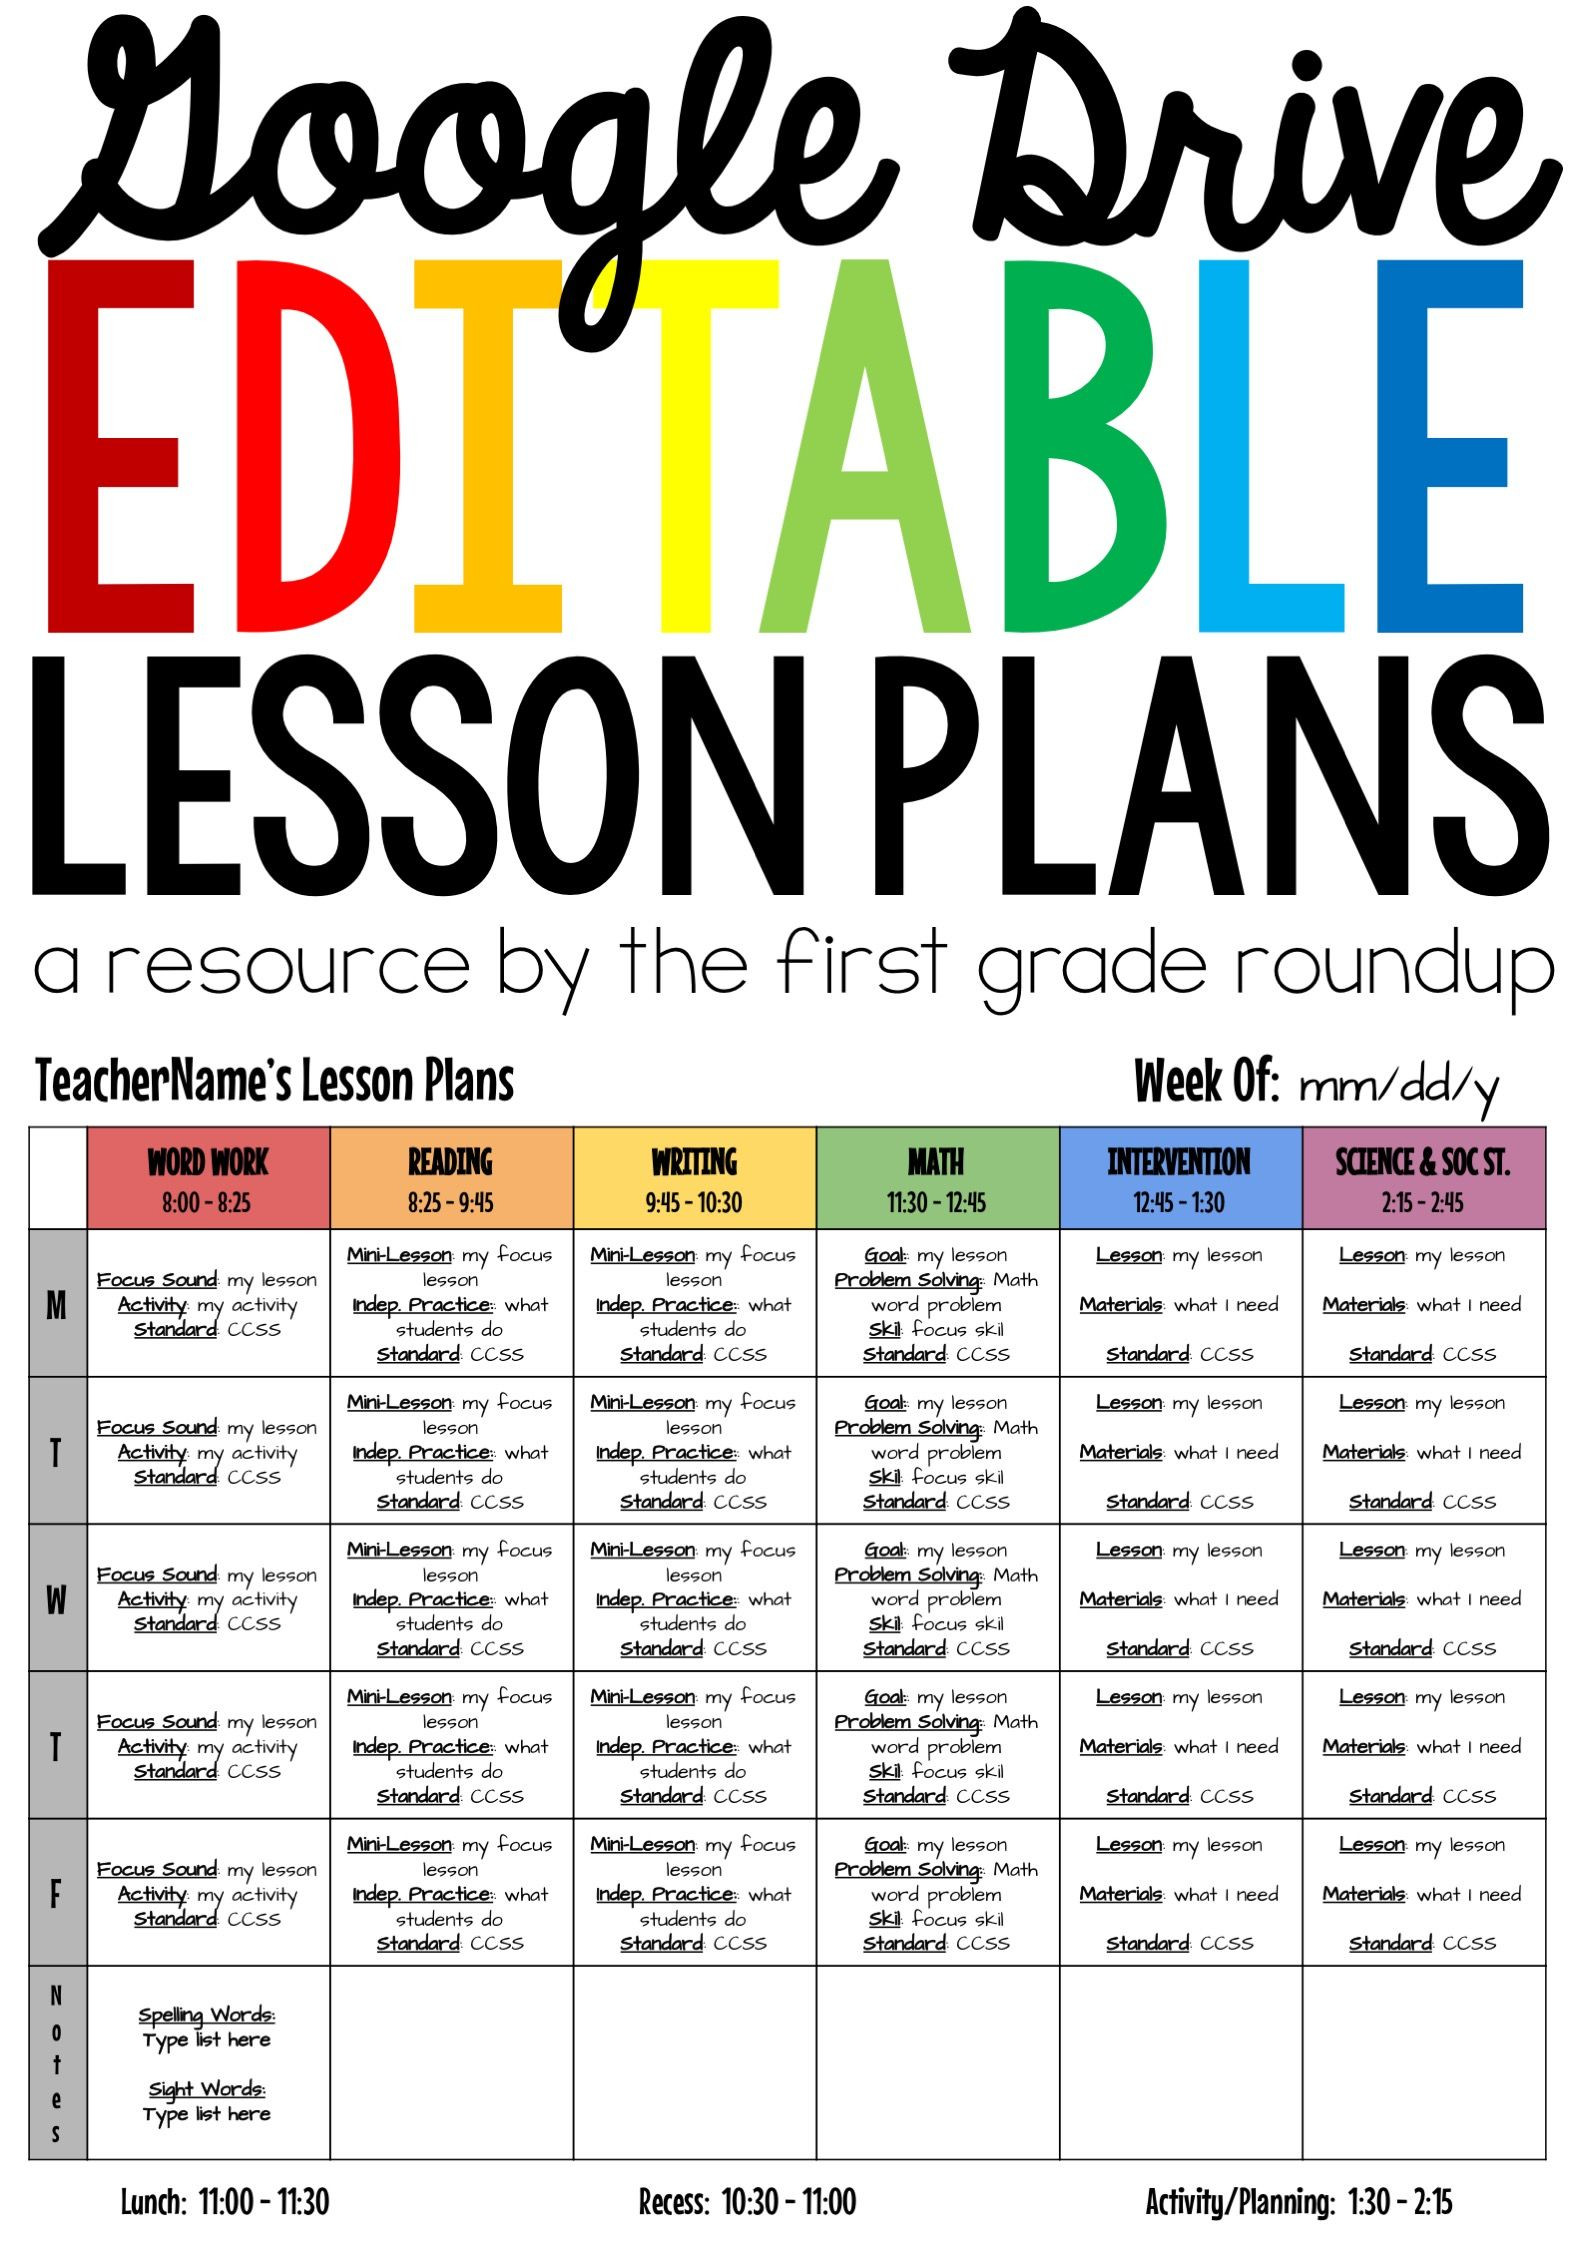 Digital Lesson Plan Digital Lesson Plan Template Editable Patible with